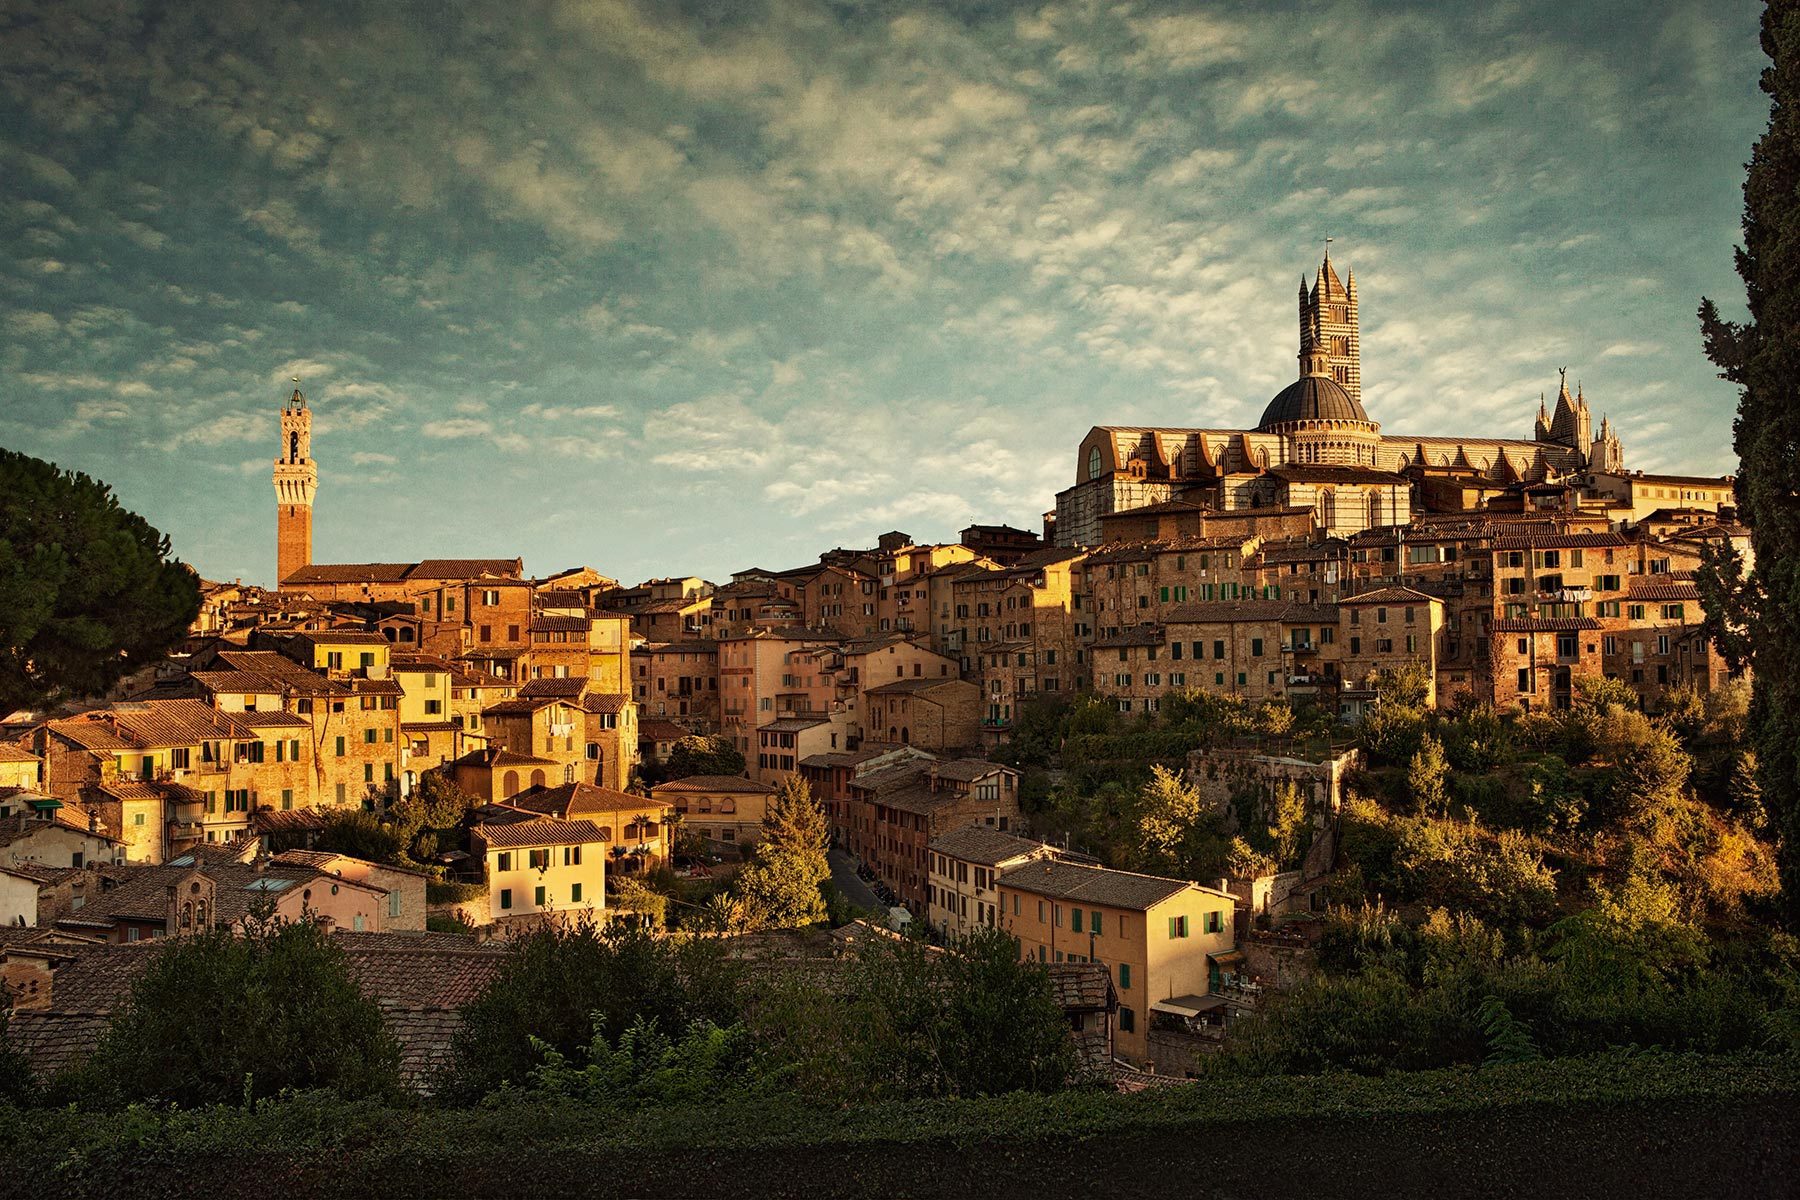 Of Siena Italy Wallpaper And Image Pictures Photos